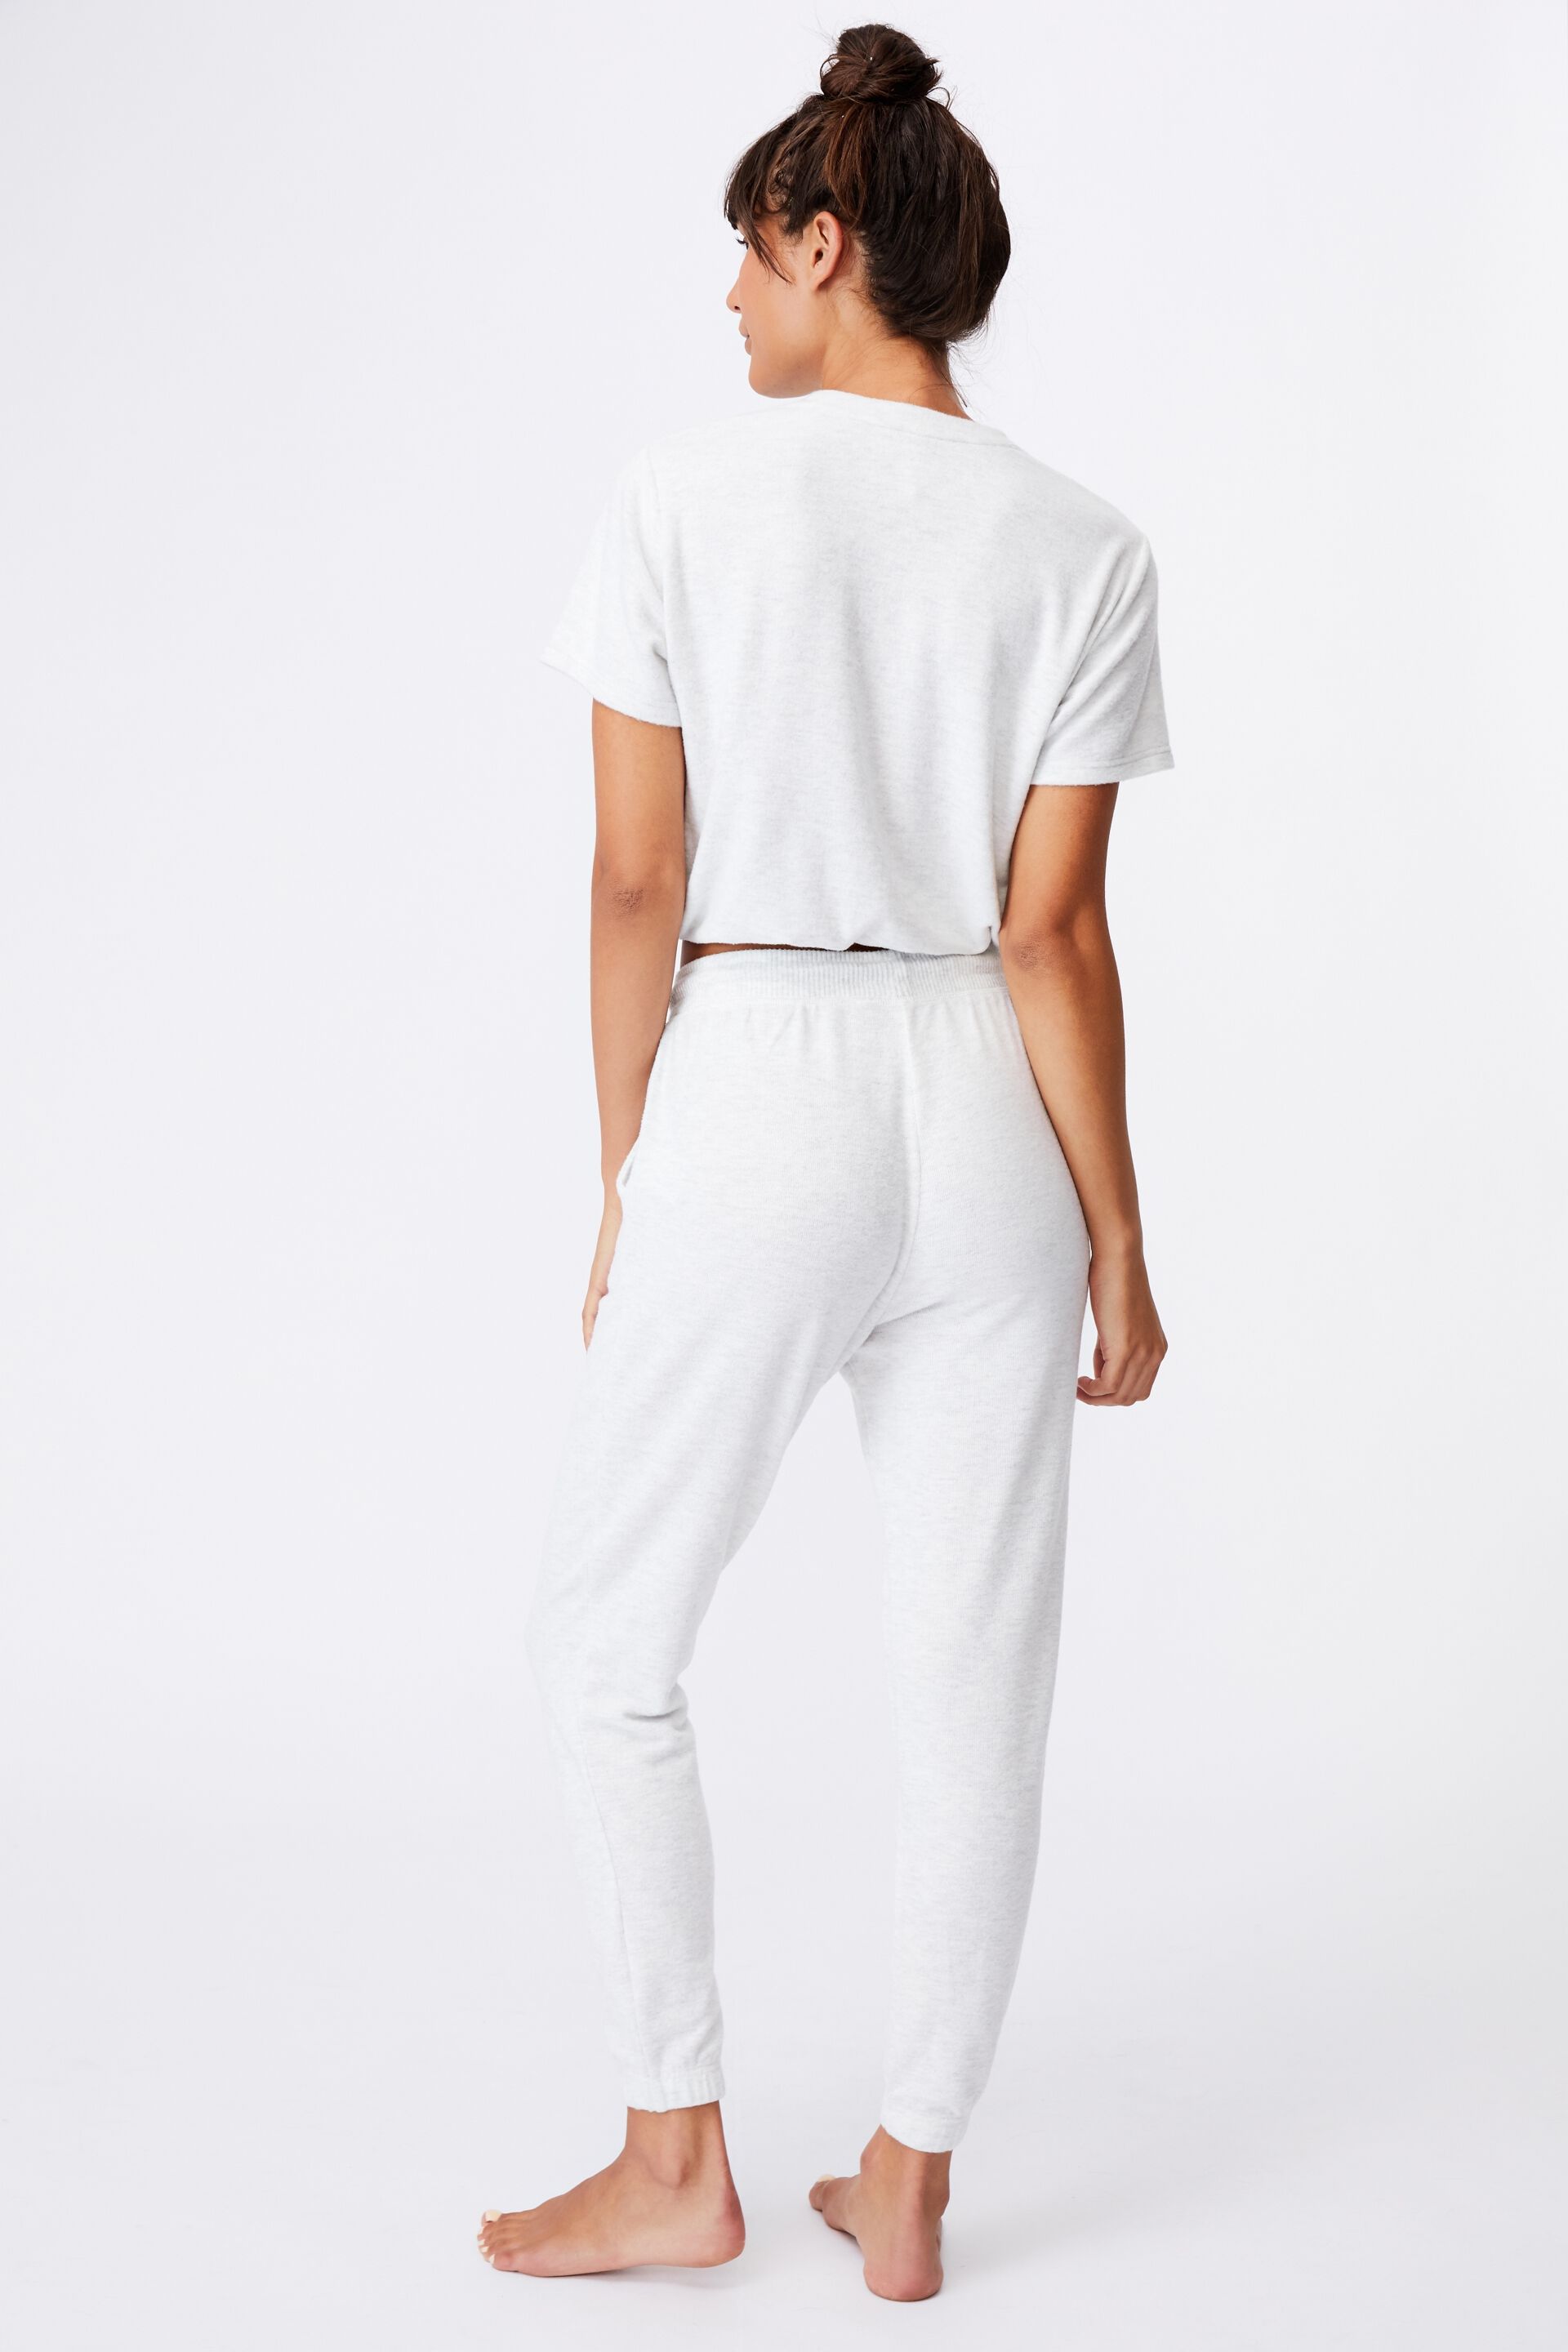 Gifts Gifts For Her | Super Soft Slim Cuff Pant - KD95248